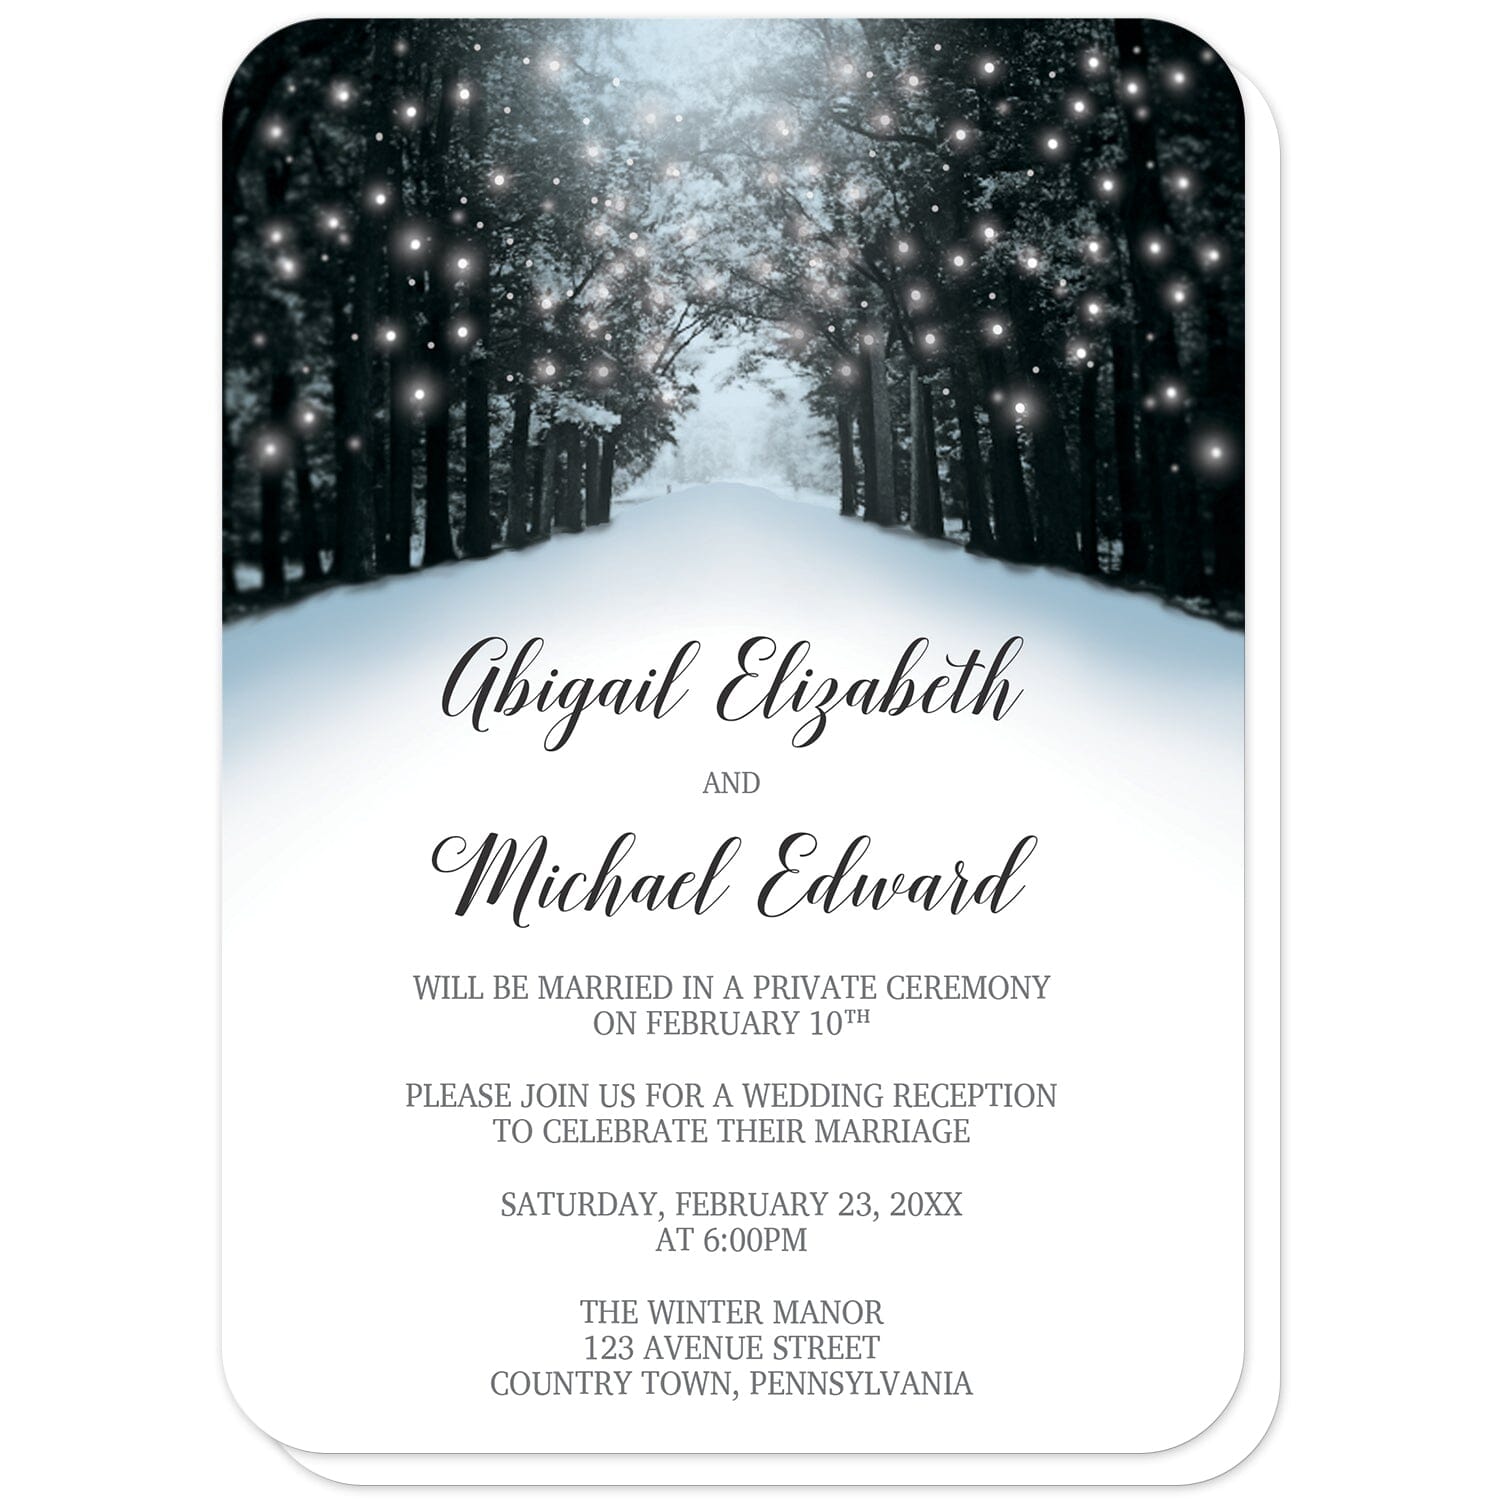 Snowy Winter Road Tree Lights Reception Only Invitations (with rounded corners) at Artistically Invited. Beautiful snowy winter road tree lights reception only invitations with a snowy tree lined road filled with white holiday lights. They're designed in a blue, black, and gray winter color scheme with a winter wonderland theme. Your personalized post-wedding reception details are custom printed in black and gray over a snow white background below the snowy road design.